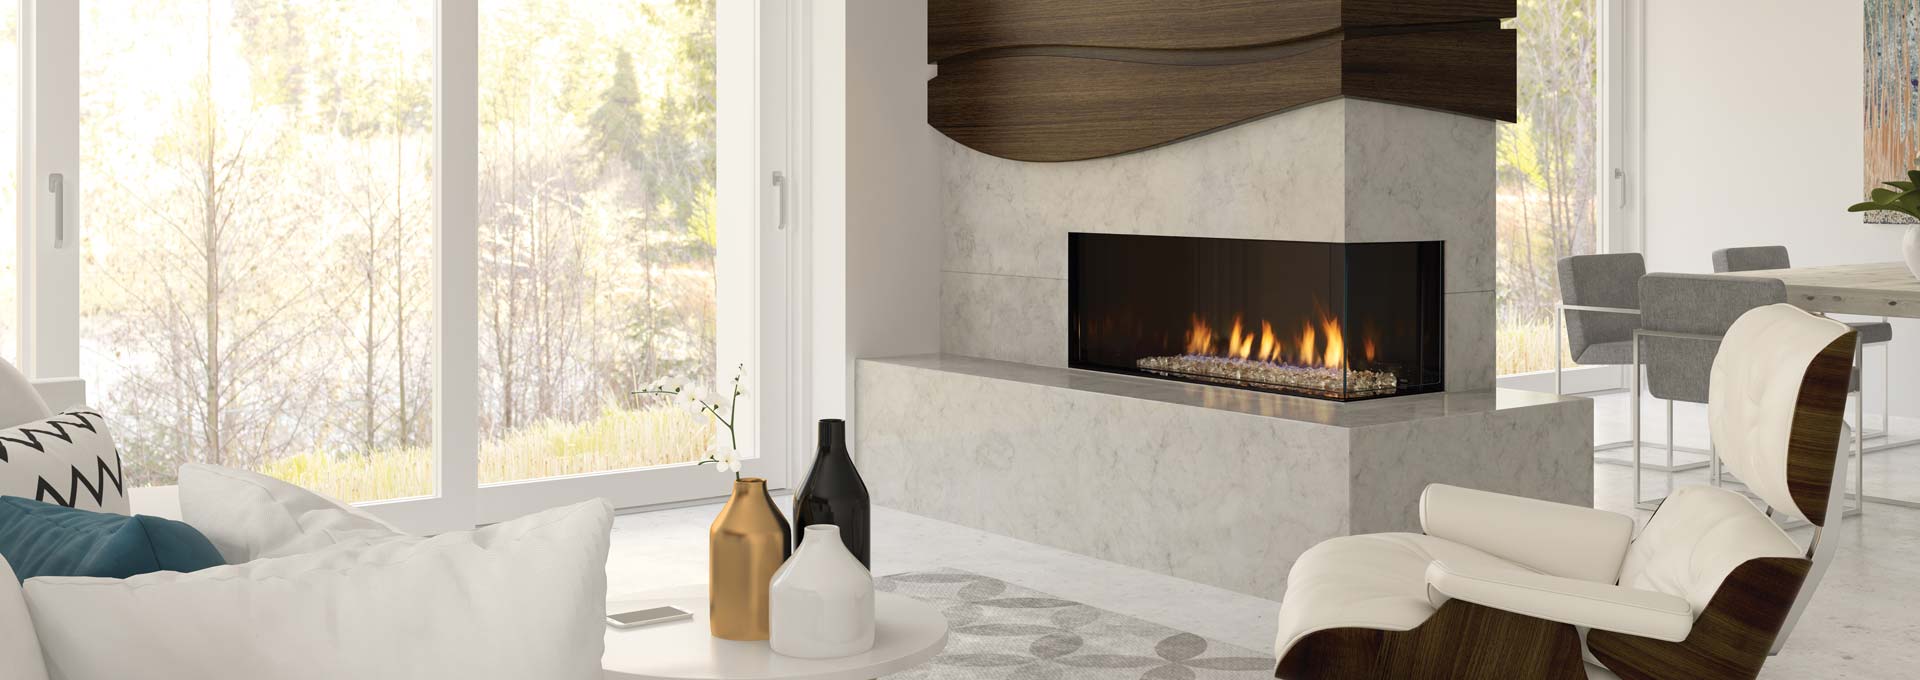 Fireplace Renovation Guide: What to Expect  